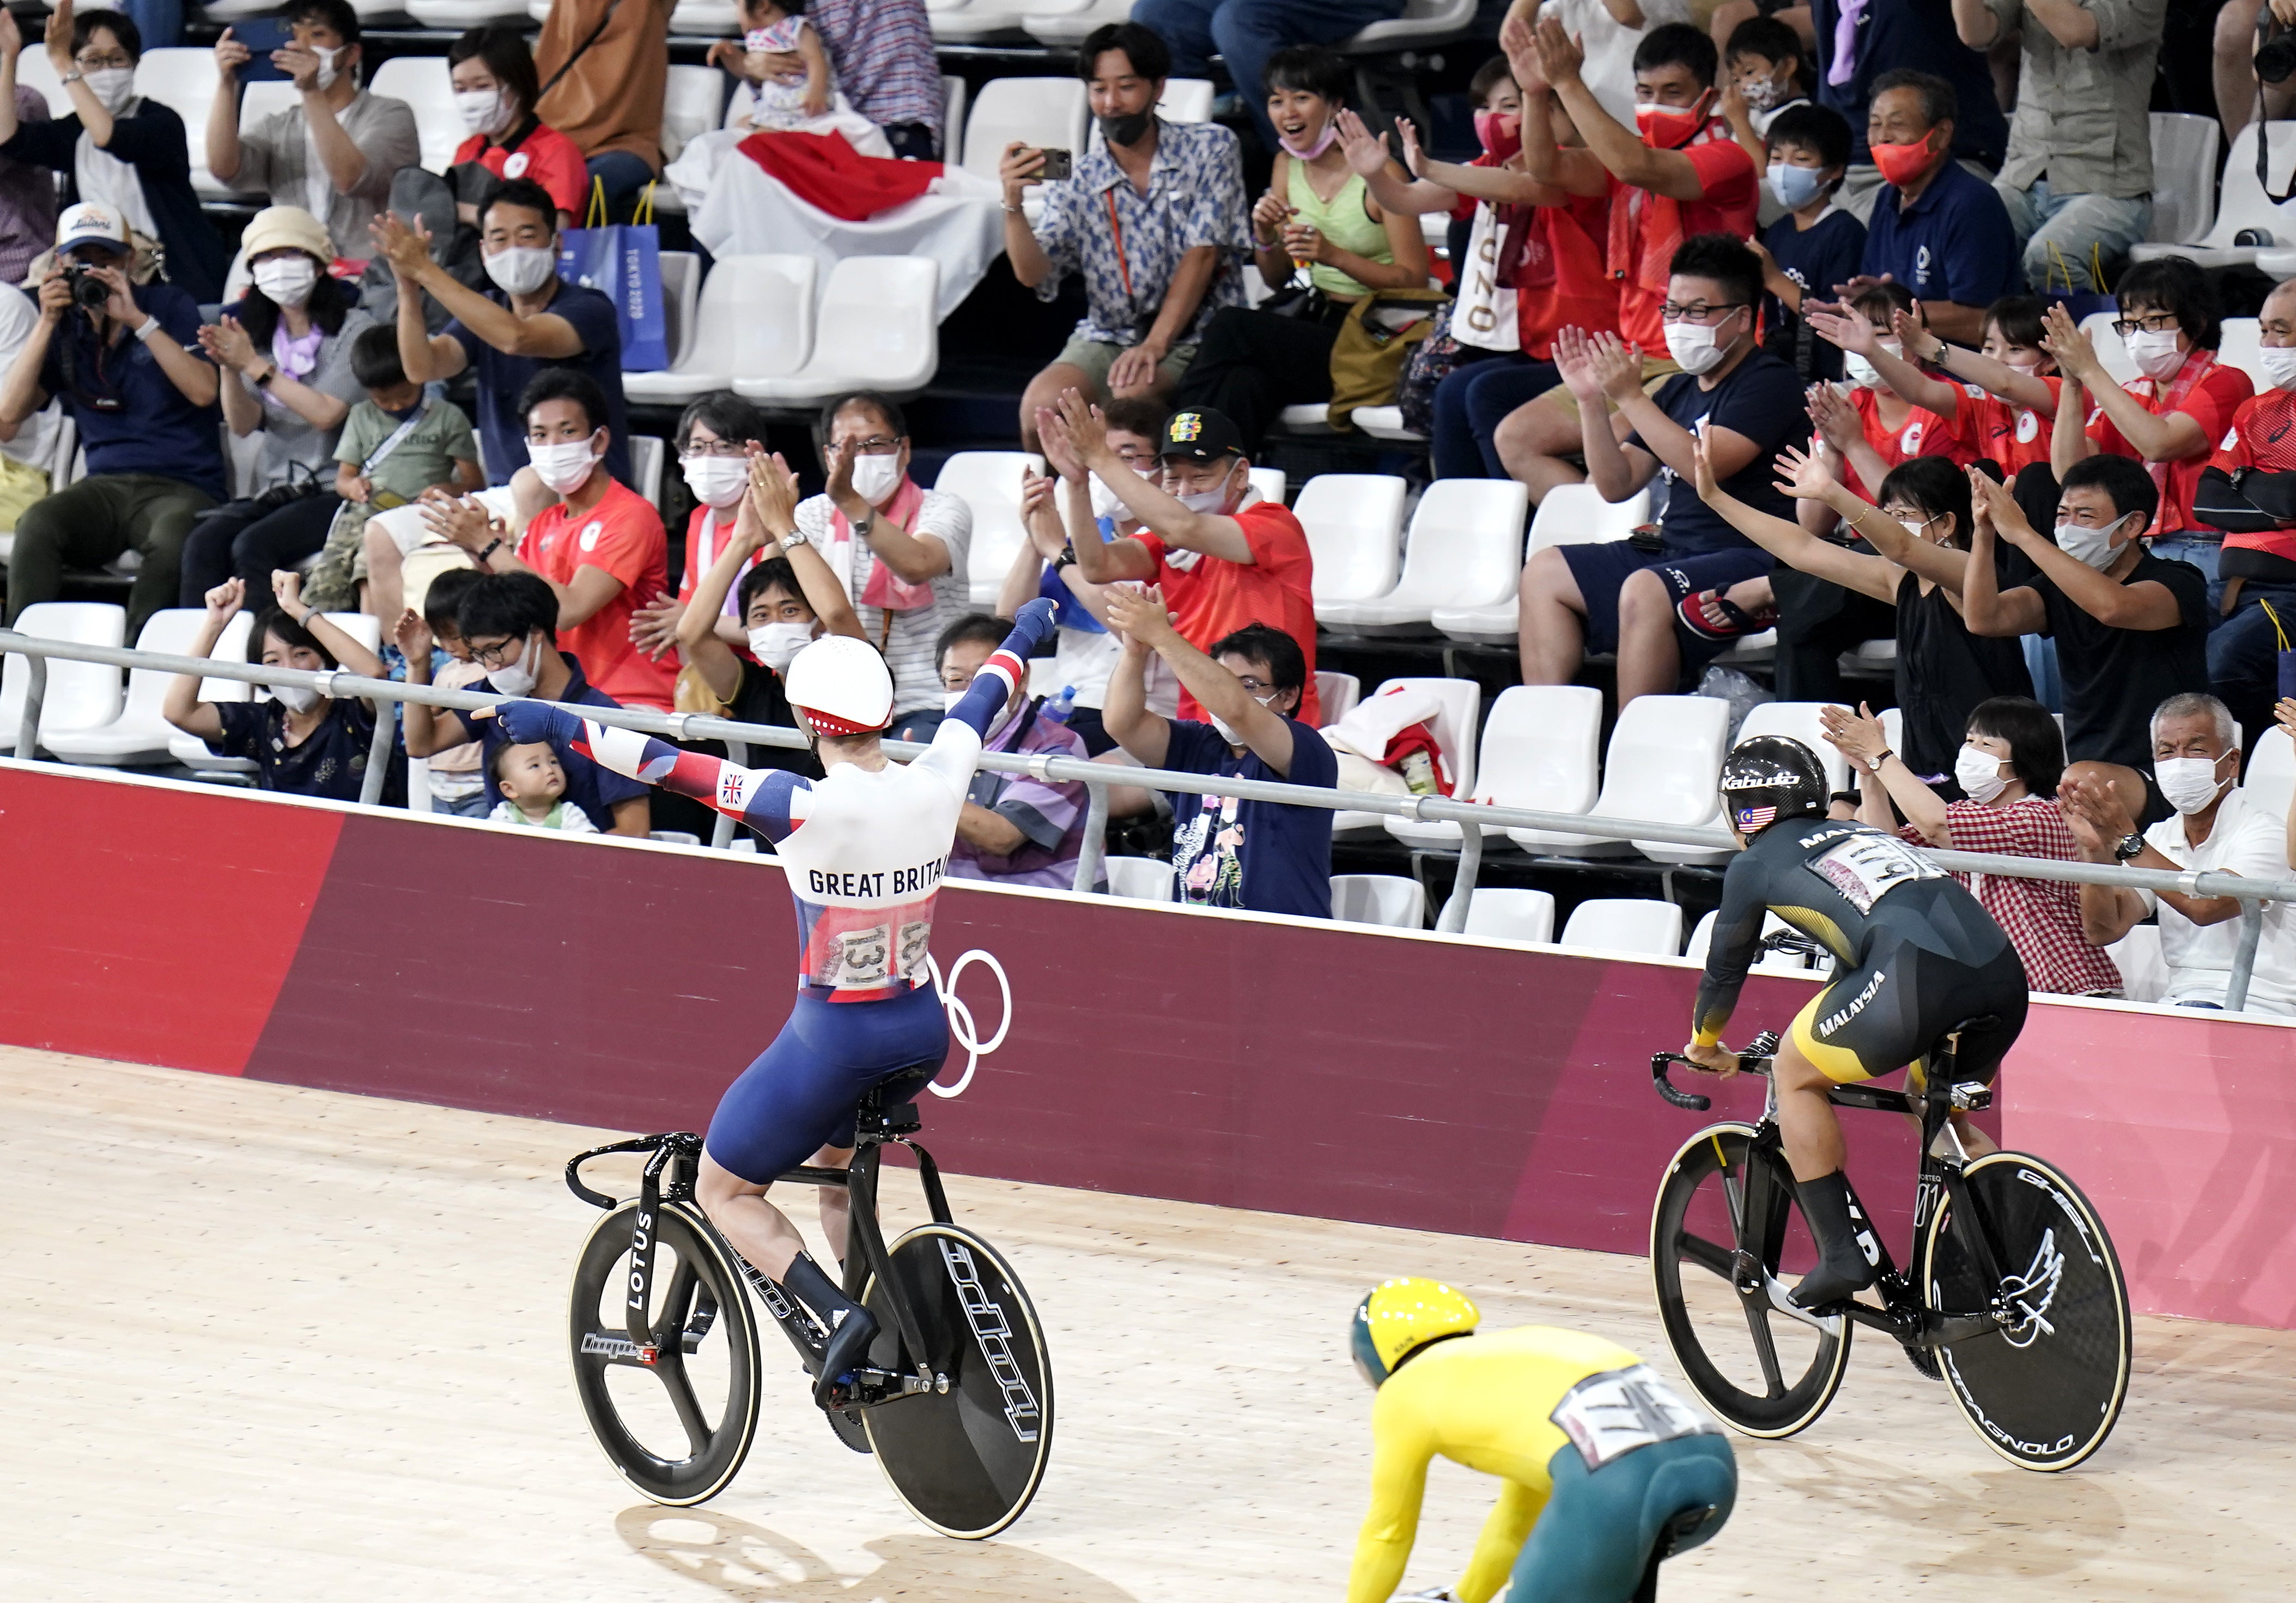 Kenny signed off with a stunning keirin victory at the Tokyo Olympics (Danny Lawson/PA)